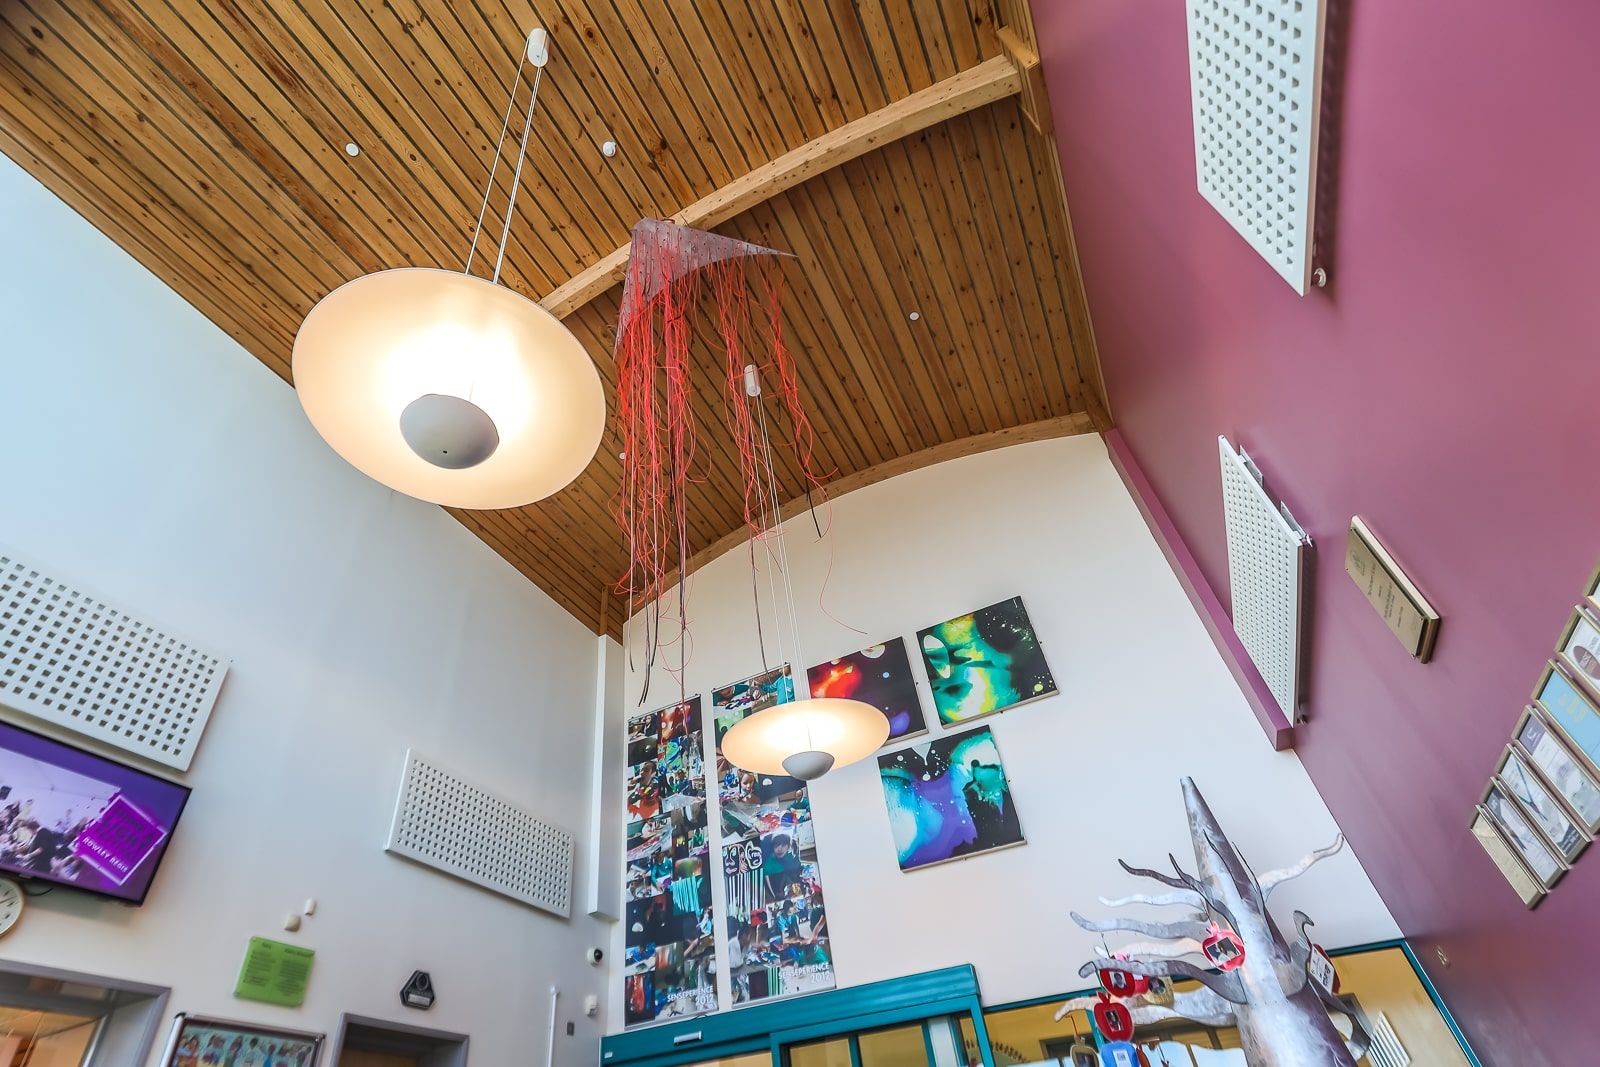 Ceiling view of a reception area of a primary school showing the new light fittings